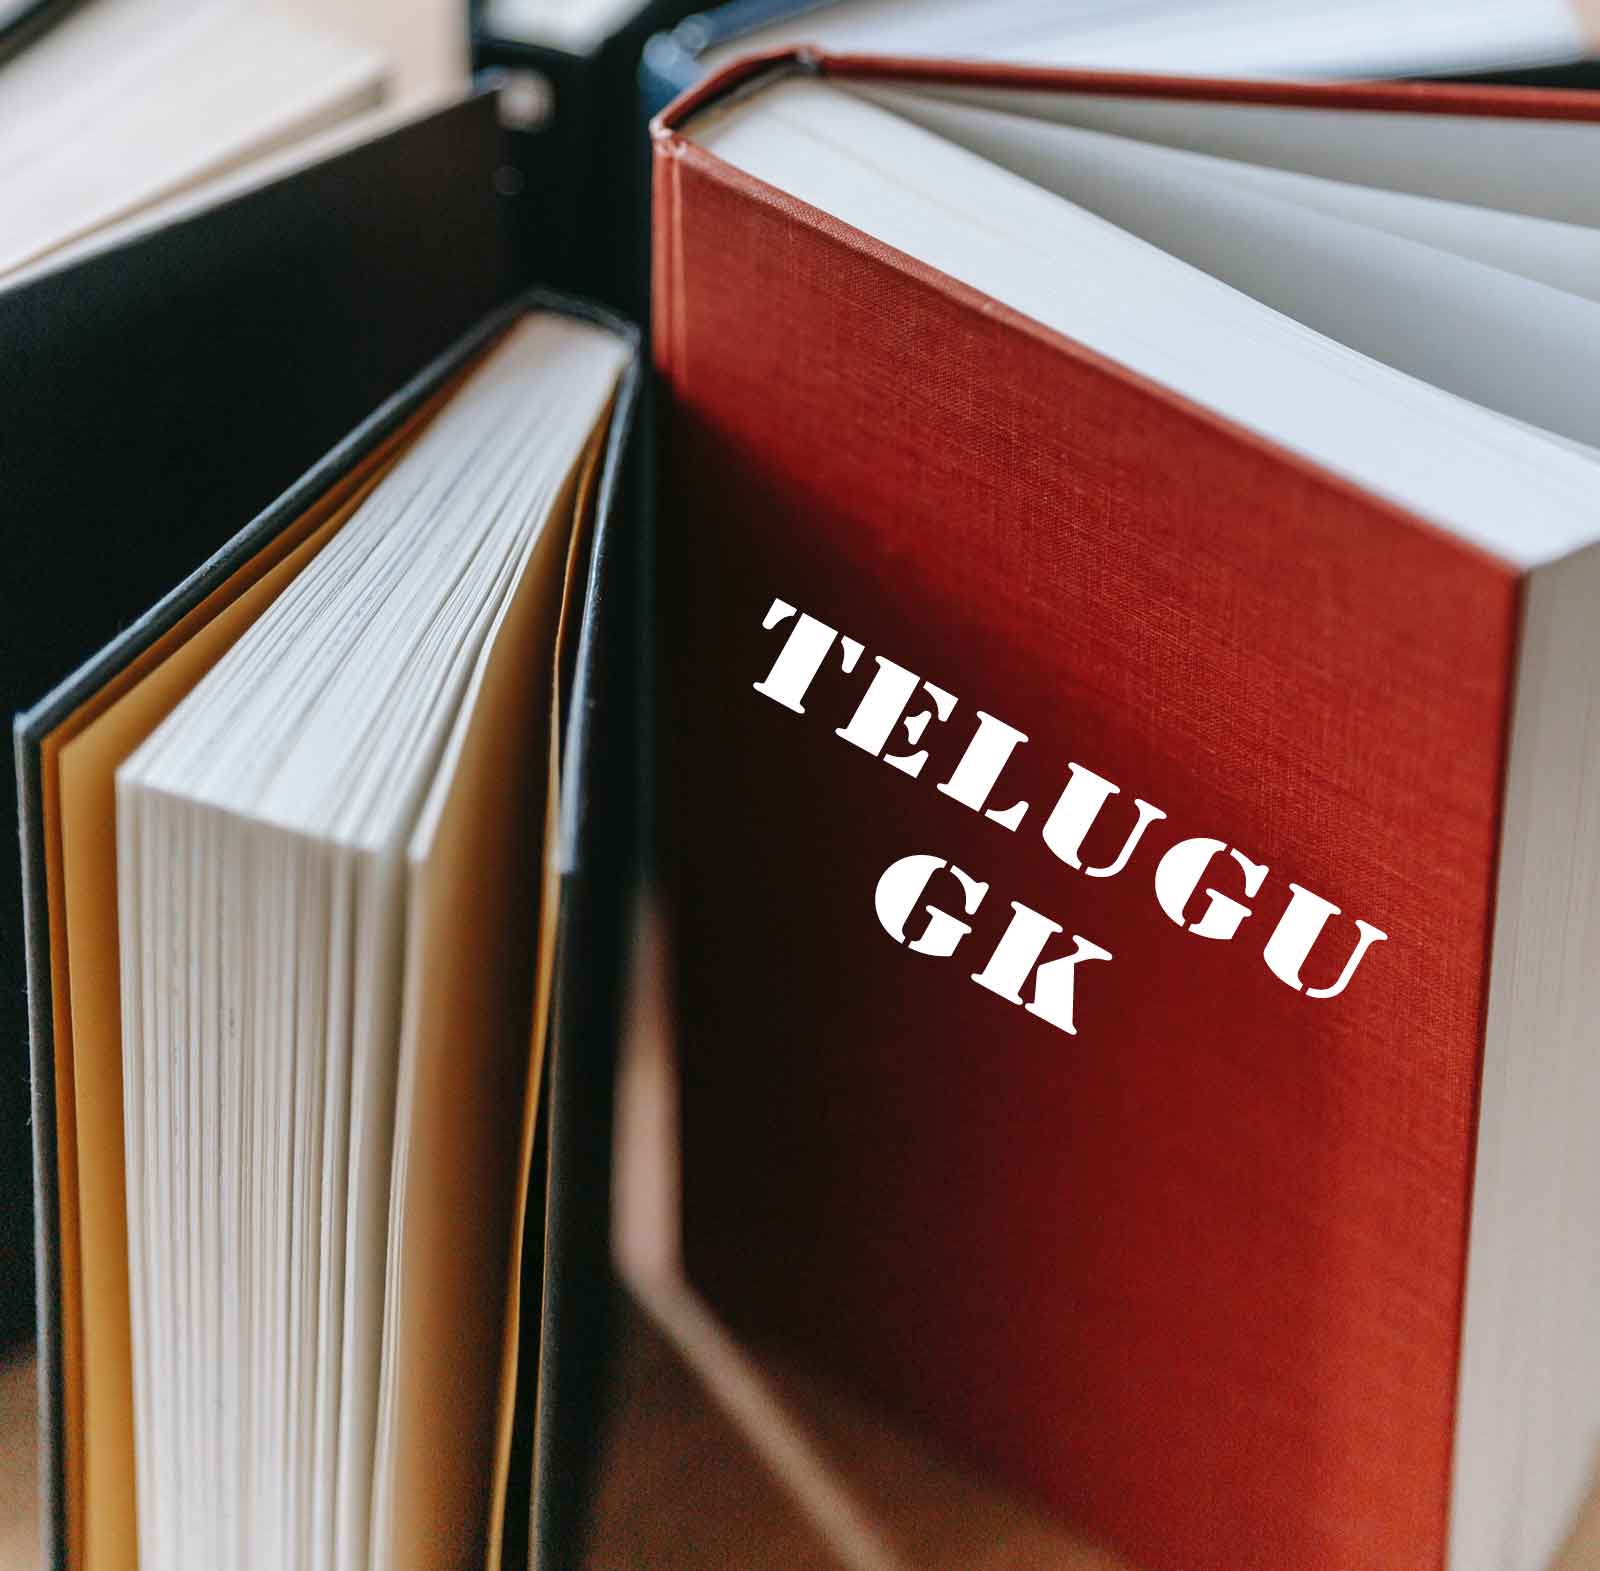 Telugu GK Typical Questions and Answers